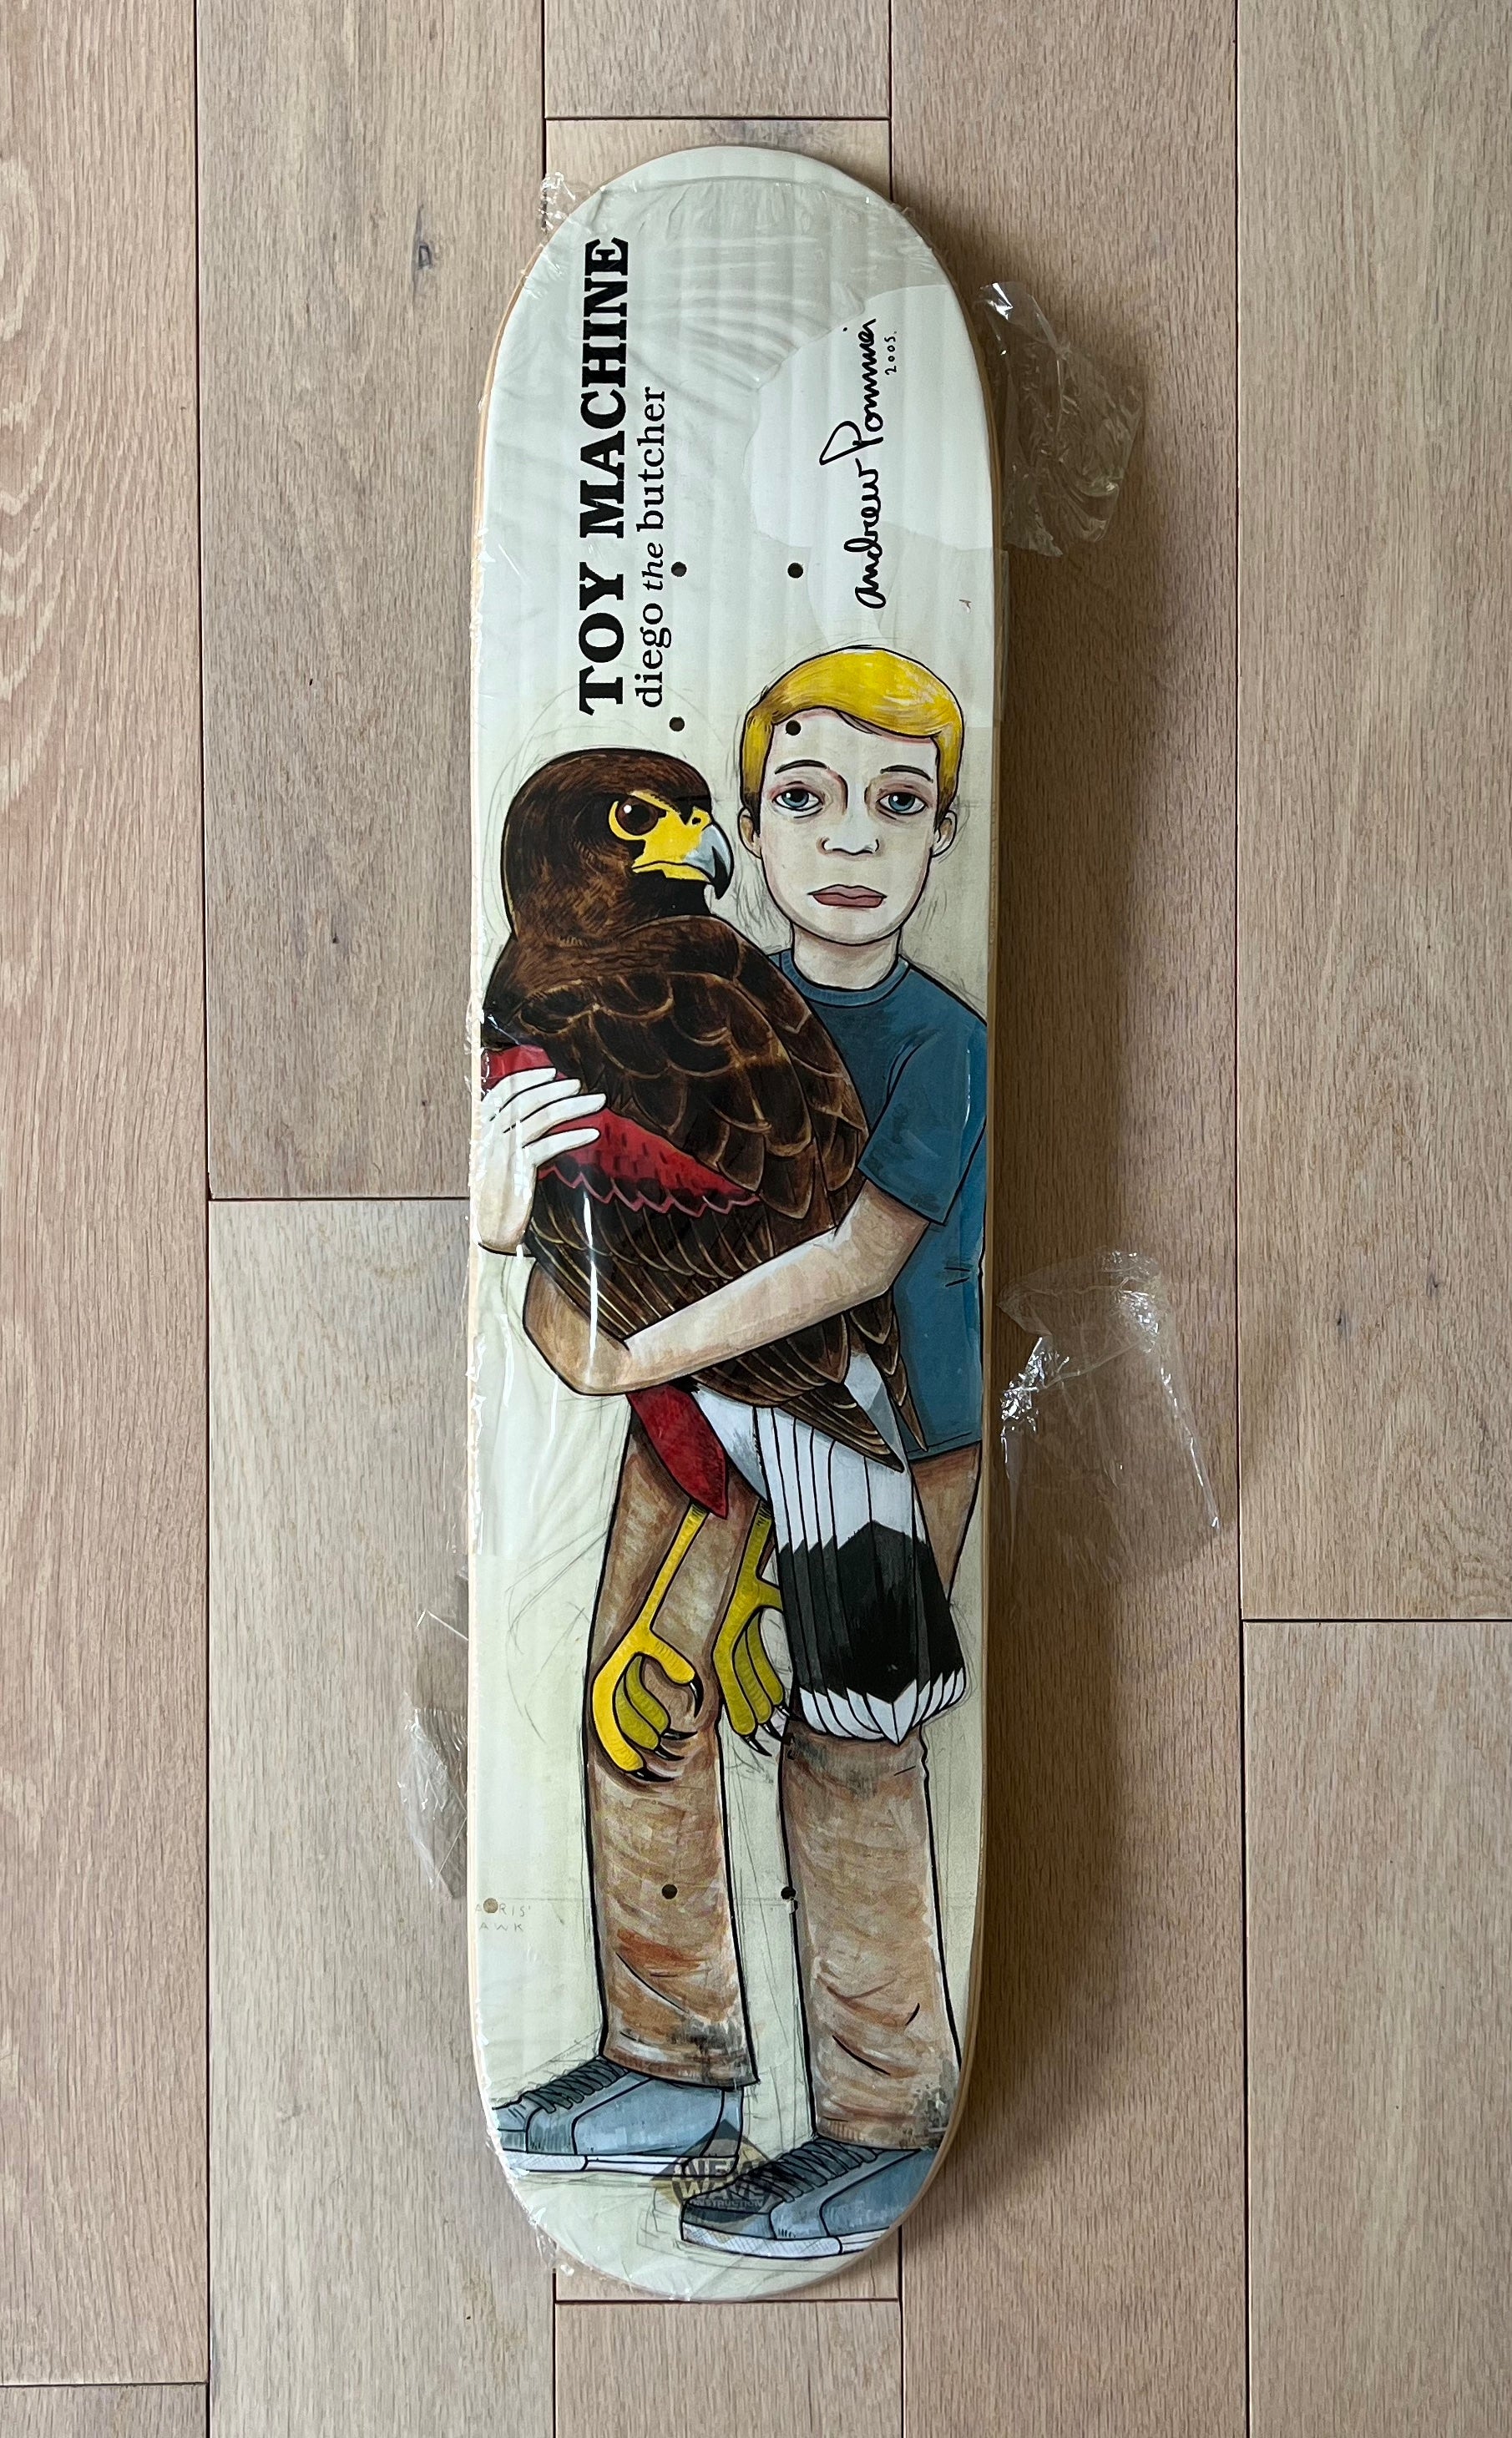 Andrew Pommier x Toy Machine "Diego The Butcher Hawk", 2004 SIGNED